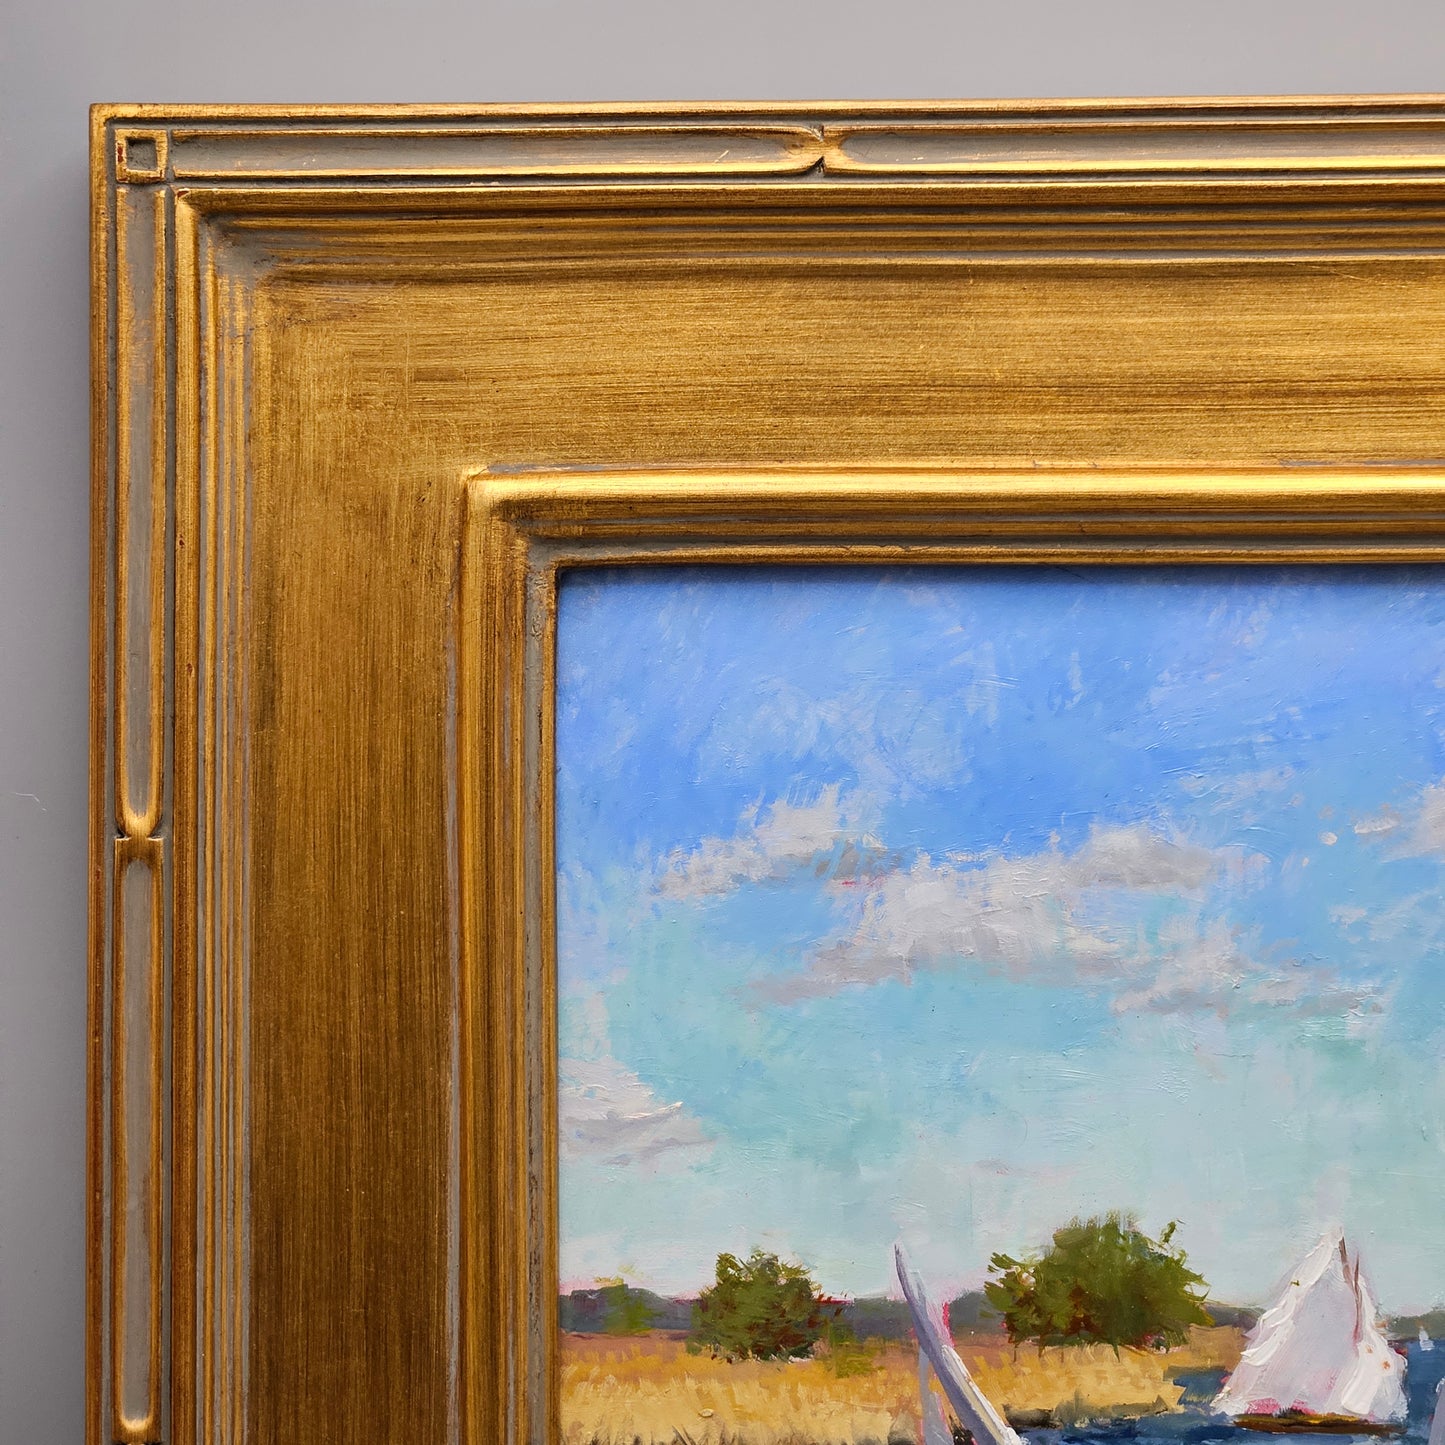 Decorative Oil Painting on Board of Sailboat Scene in Gold Frame